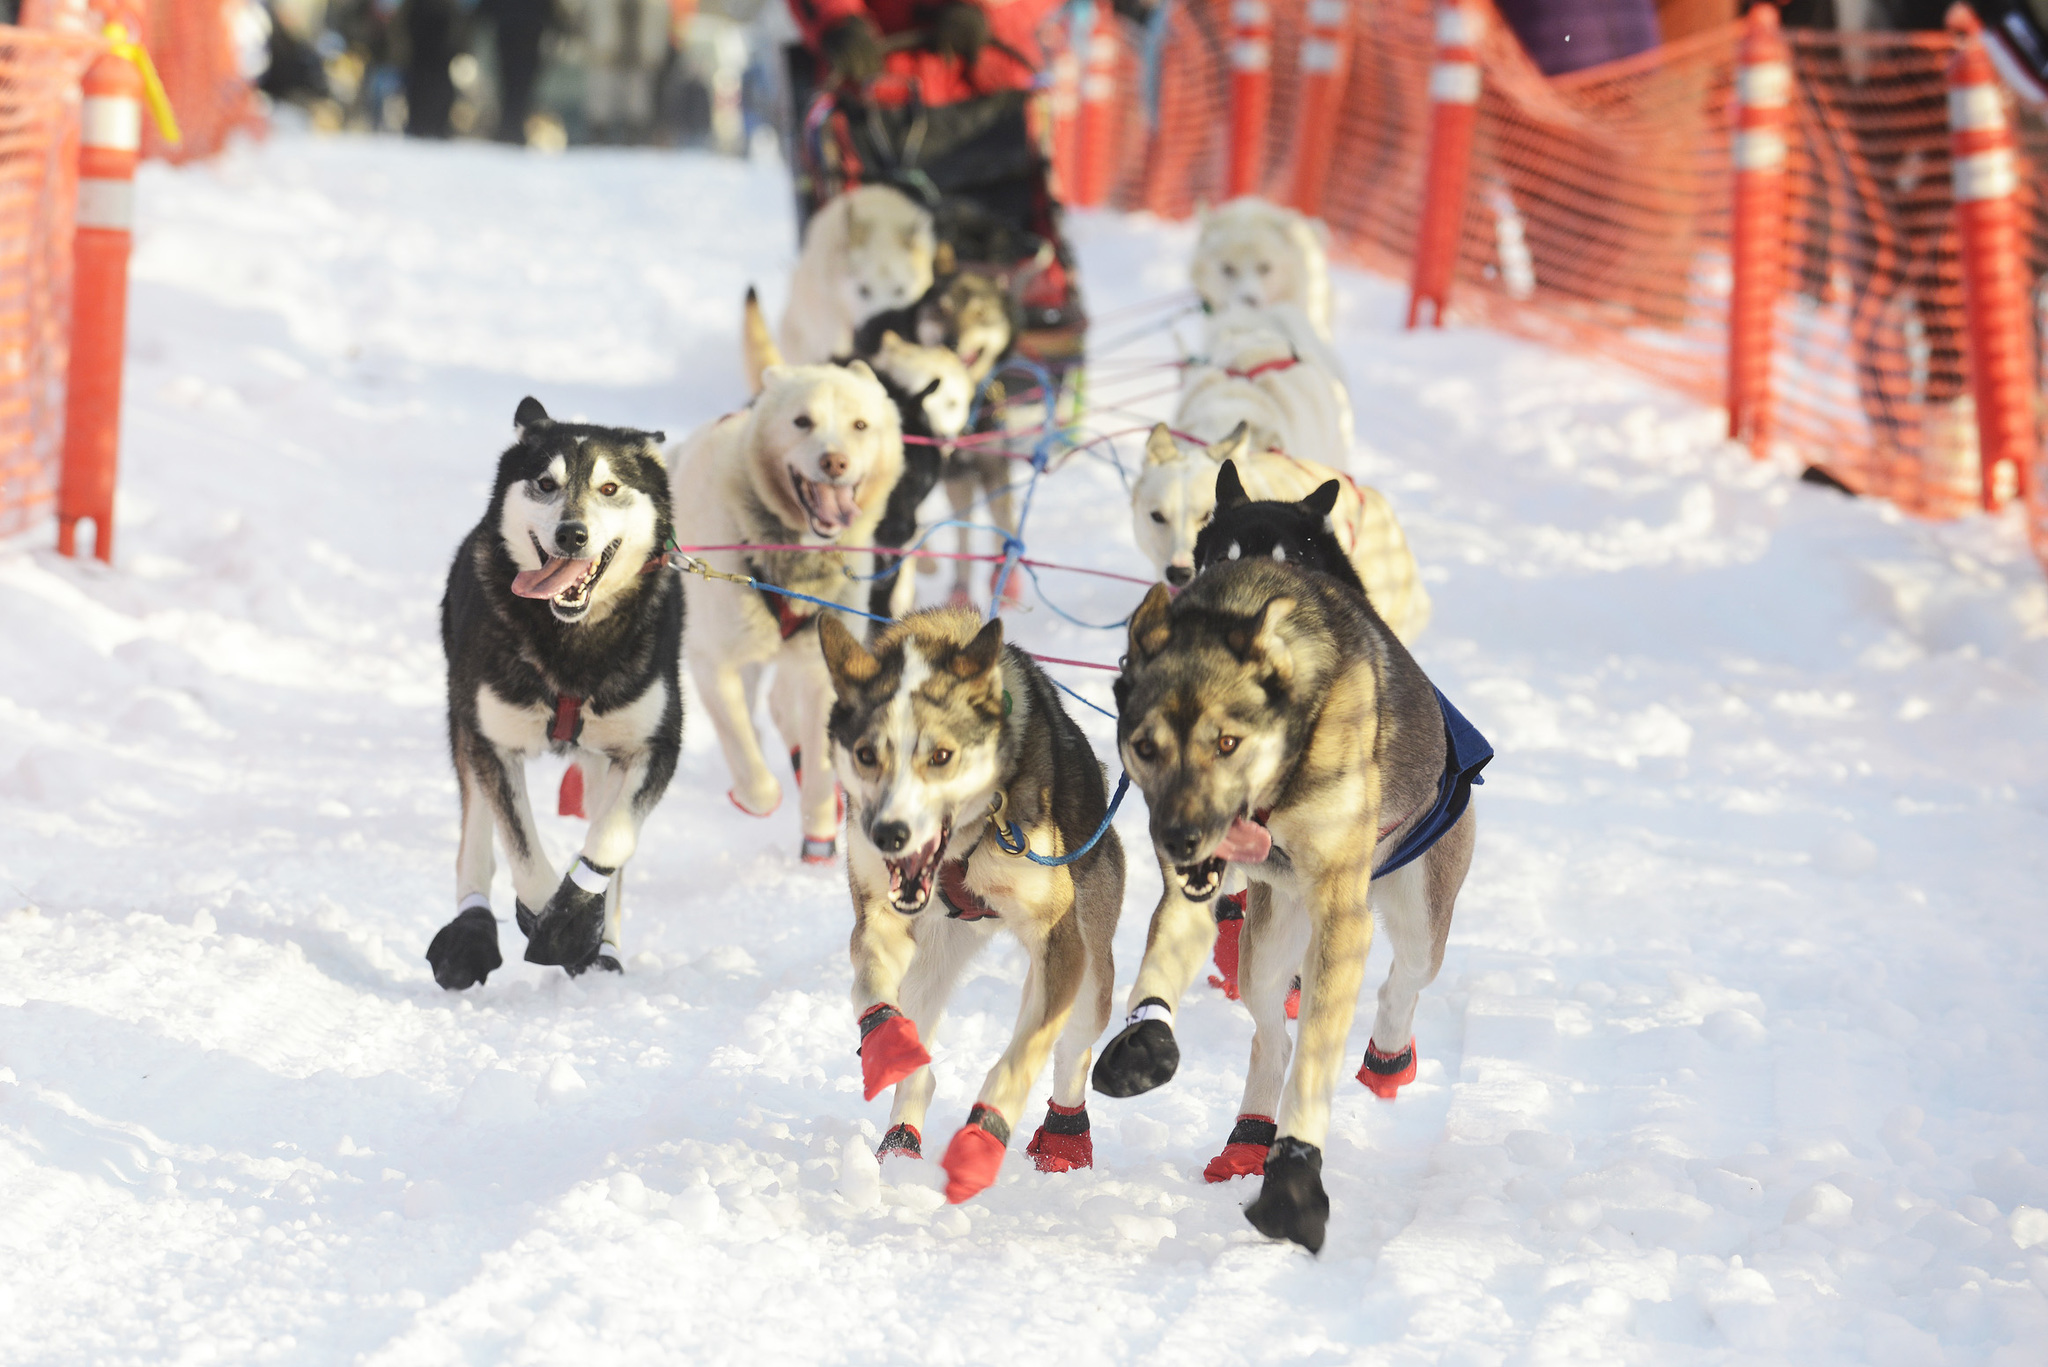 A team of dogs pulls a sled and their musher through the starting stretch of the Tustumena 200 Sled Dog Race on Saturday, Jan. 28. 2017 in Kasilof, Alaska. Dogs in 23 teams will run through the Caribou Hills down to Homer and back in the 200-mile race. (Megan Pacer/Peninsula Clarion)